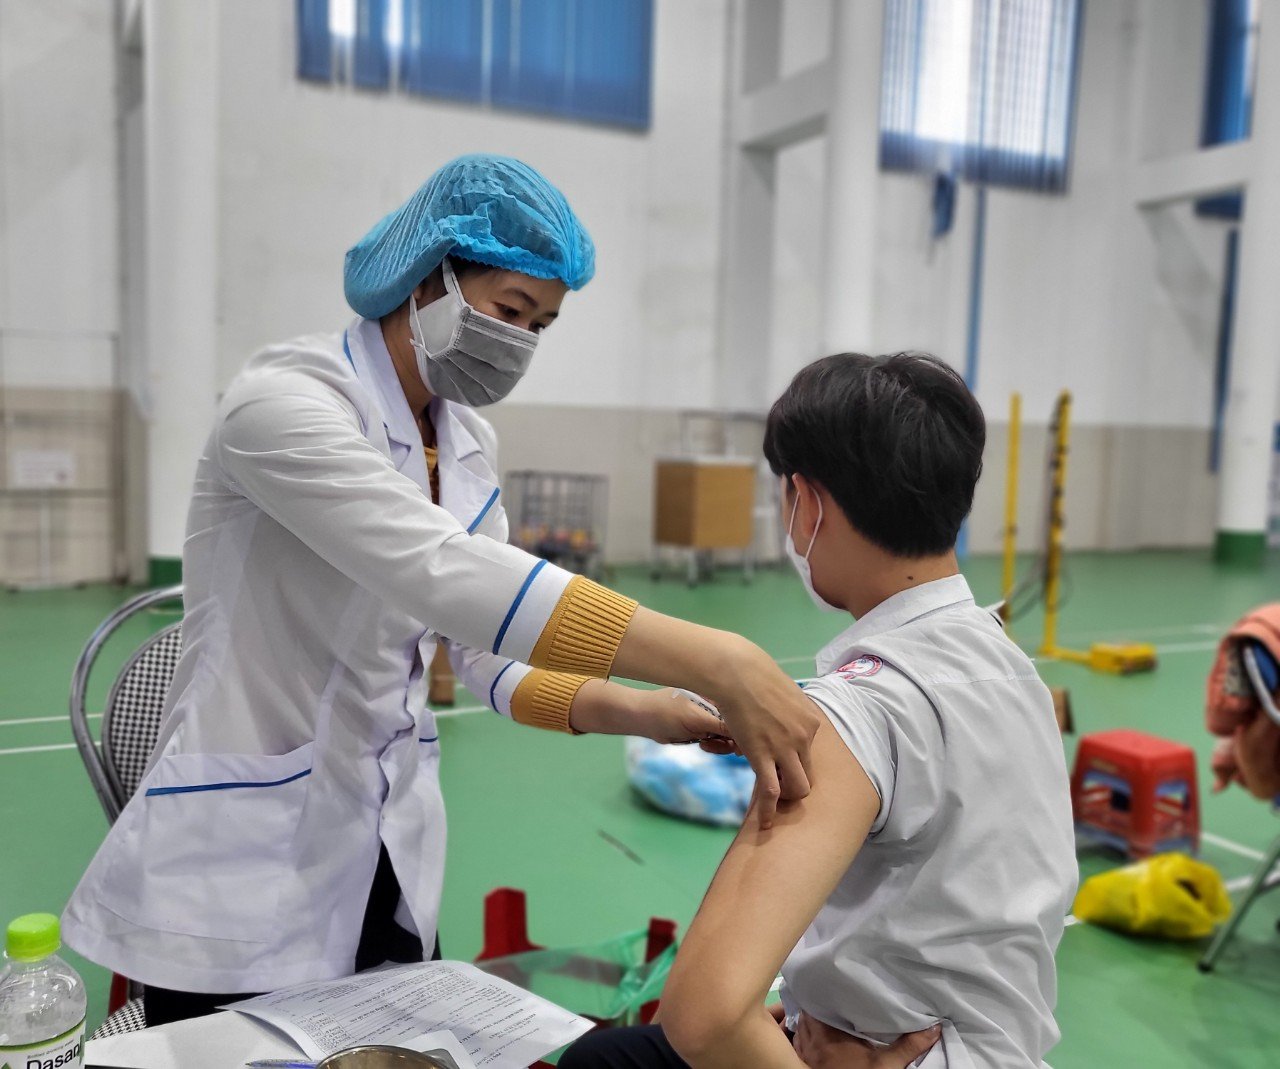 Eleventh grader with meningitis dies 3 days following COVID-19 vaccination in central Vietnam